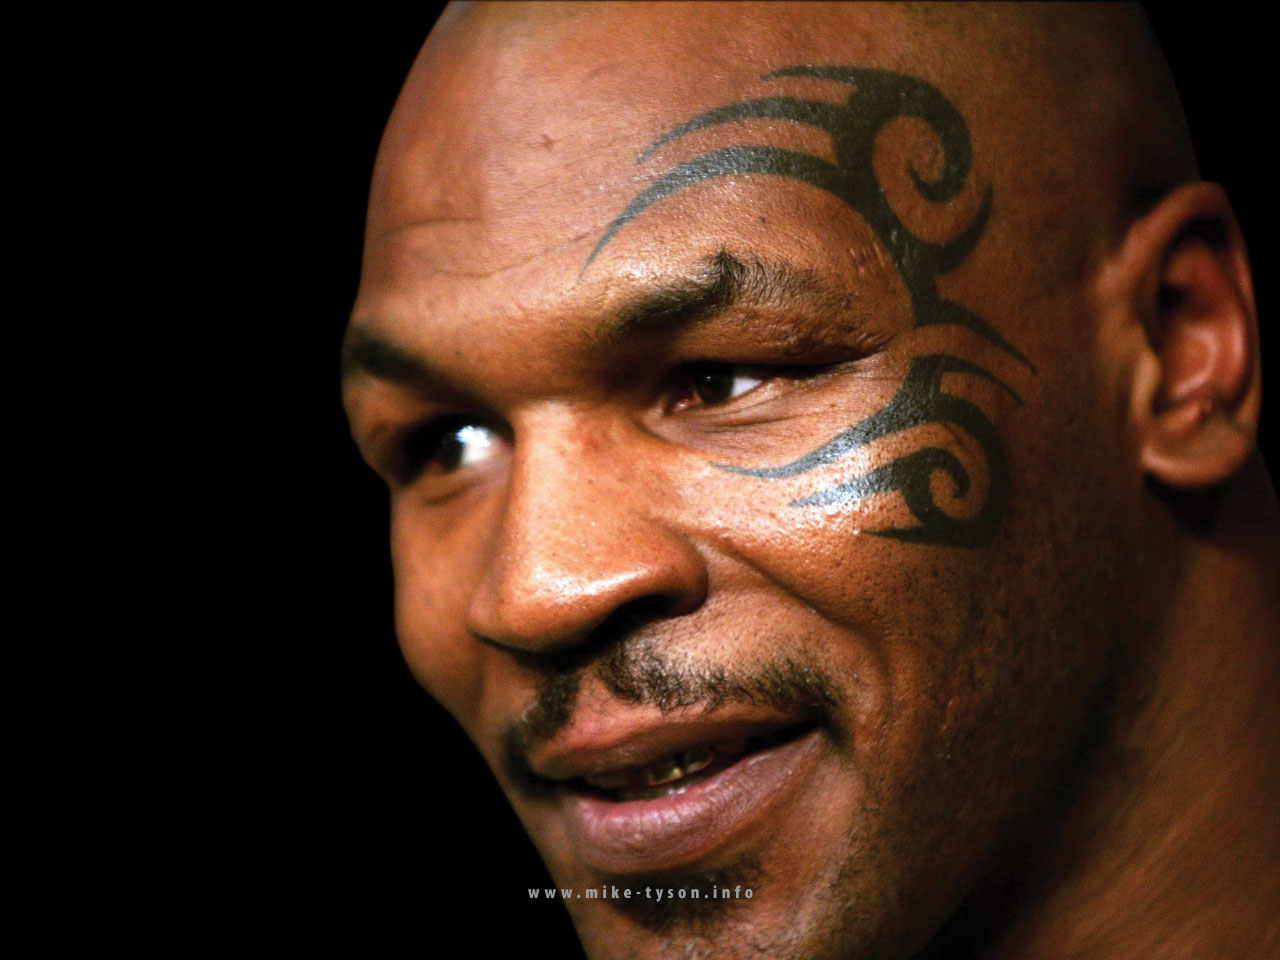 Famous People In The World: Mike Tyson The Baddest Man on the Planet